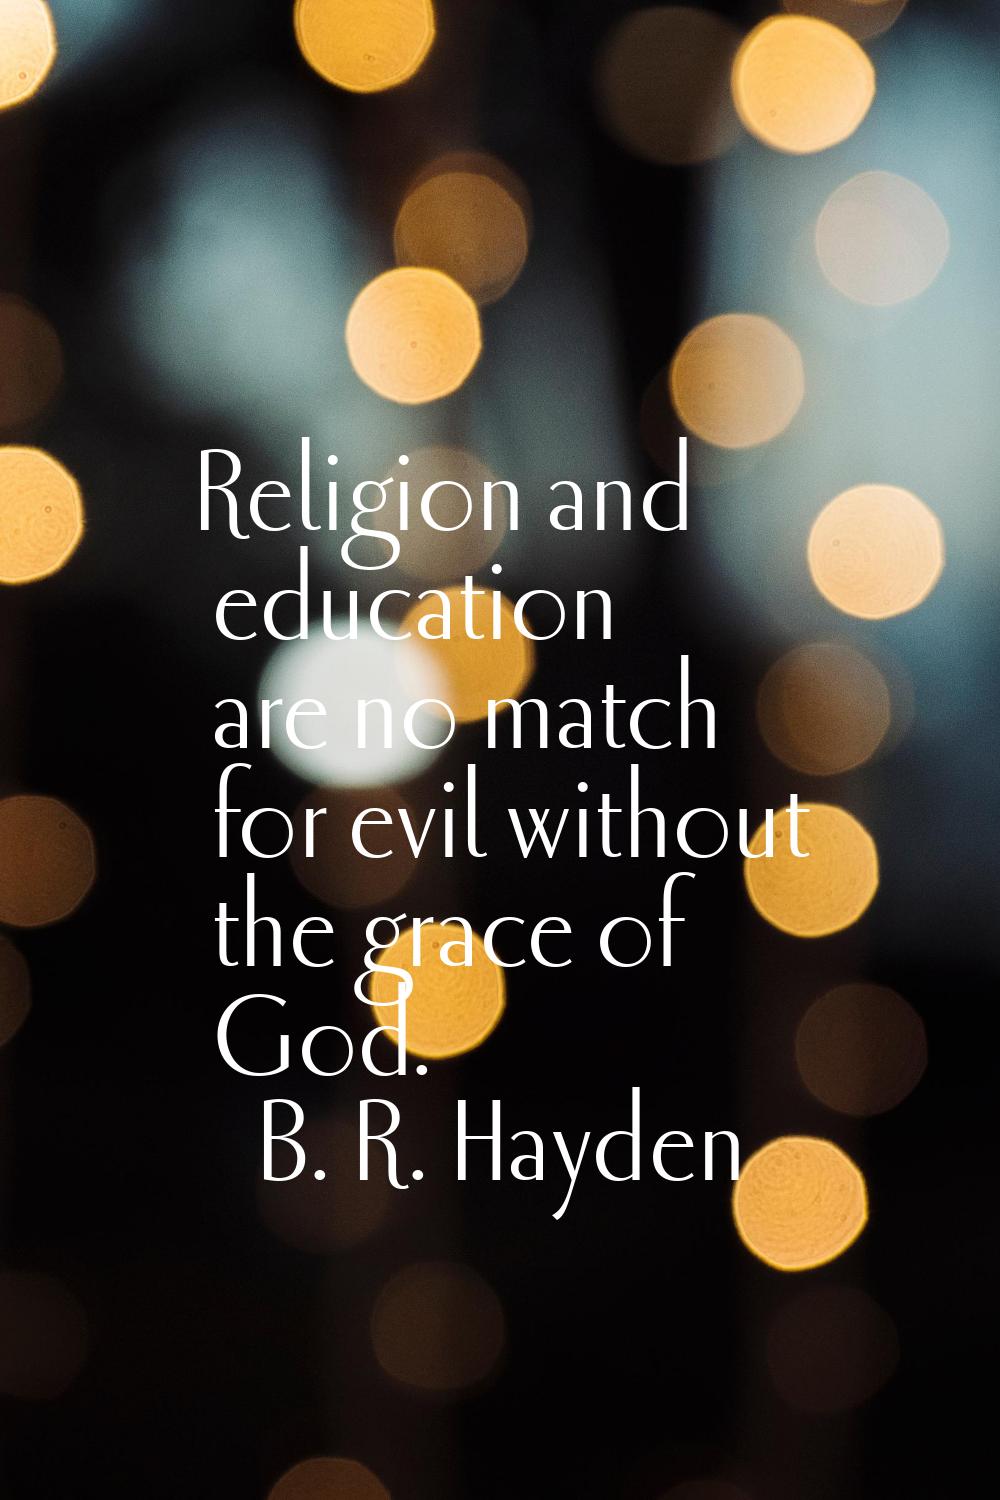 Religion and education are no match for evil without the grace of God.